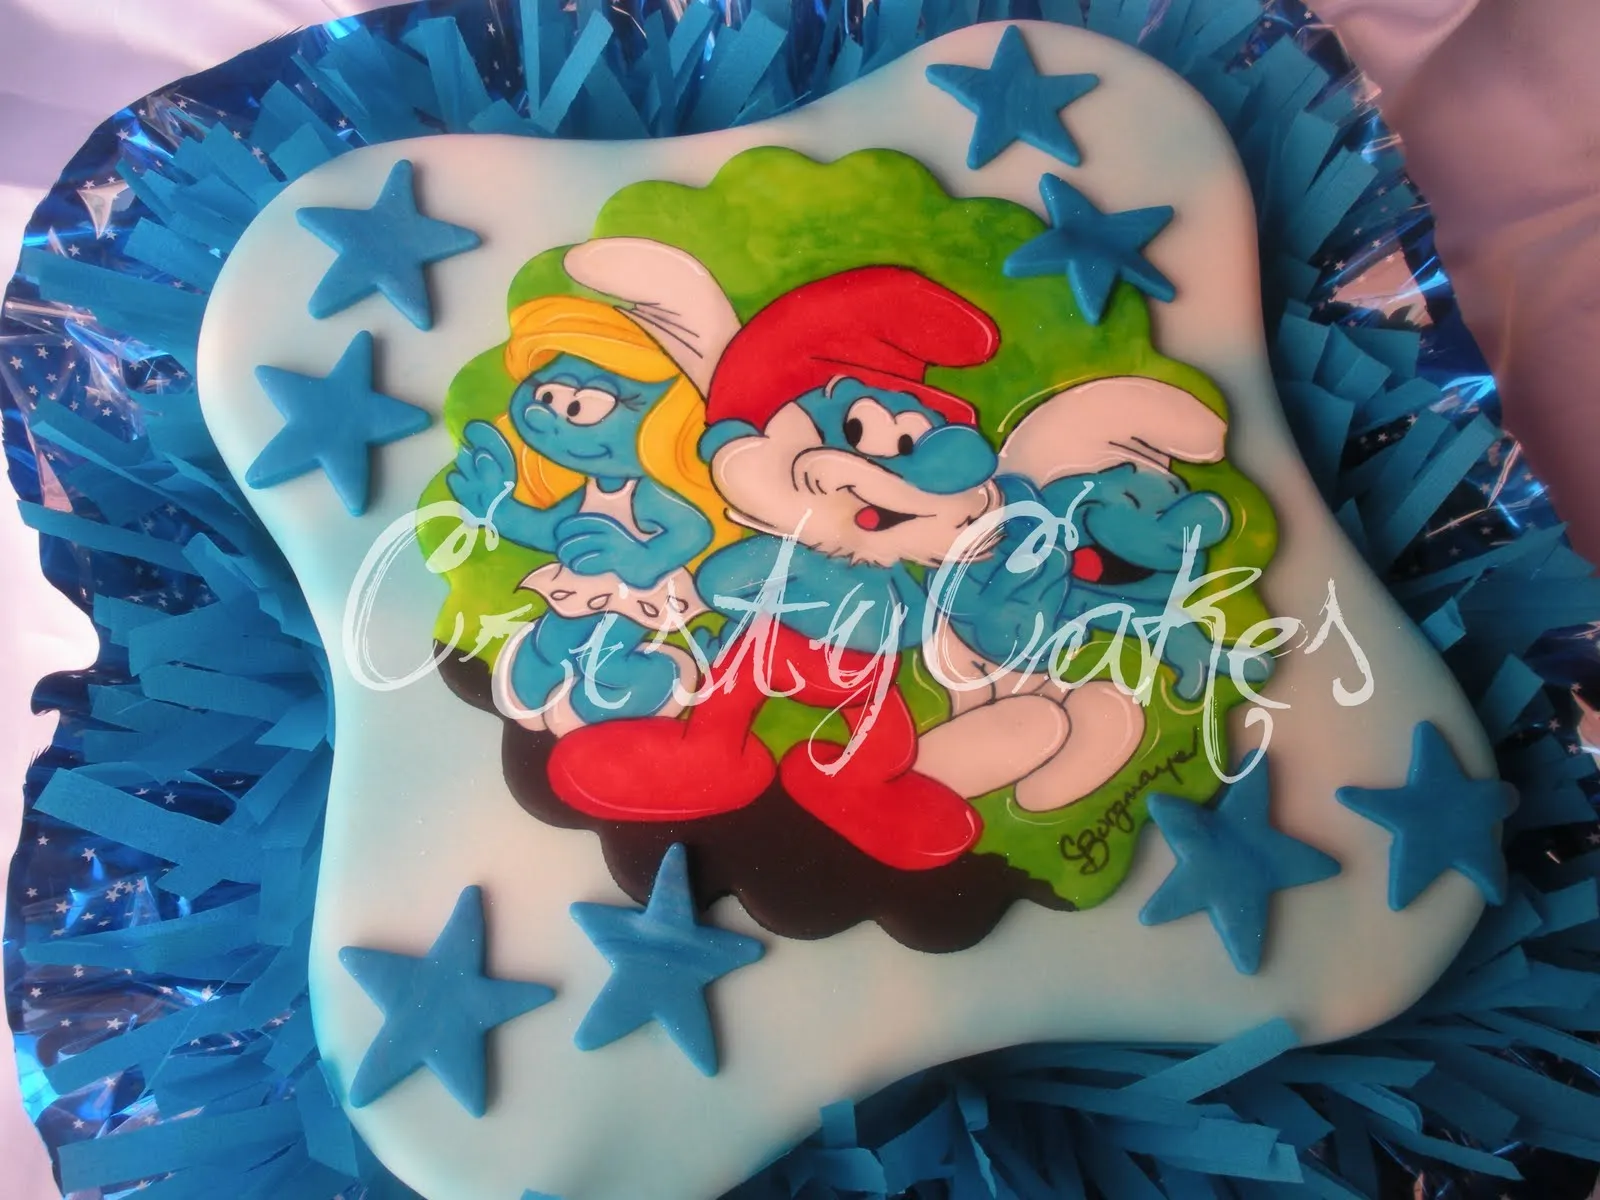 Cristy's Cakes: Los Pitufos